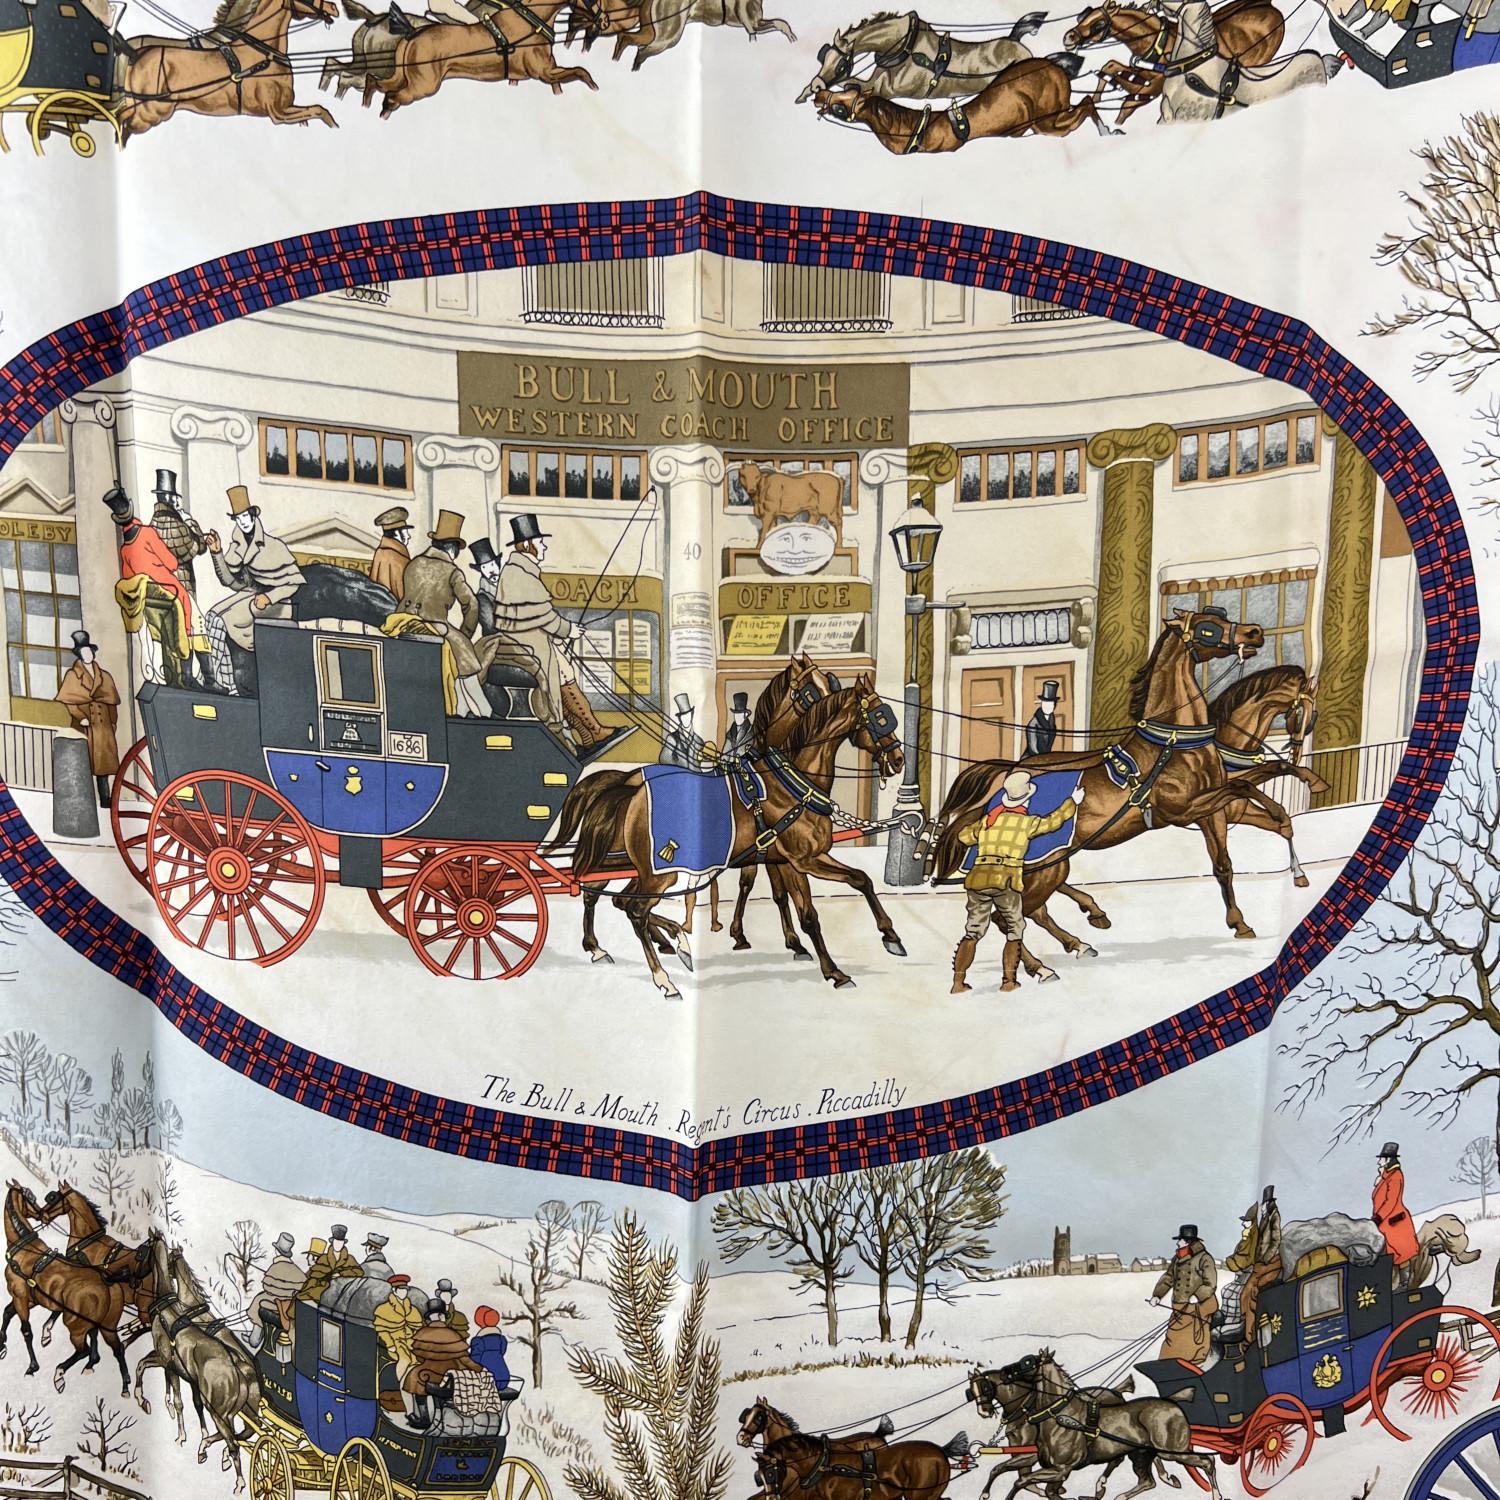 HERMES Silk scarf named 'L'HIVER EN POSTE', created by famed artist Philippe Ledoux. His design was inspired by the turn of the 19th century postal delivery system, featuring several winter scenes and London's Regent's Circus and Piccadilly square